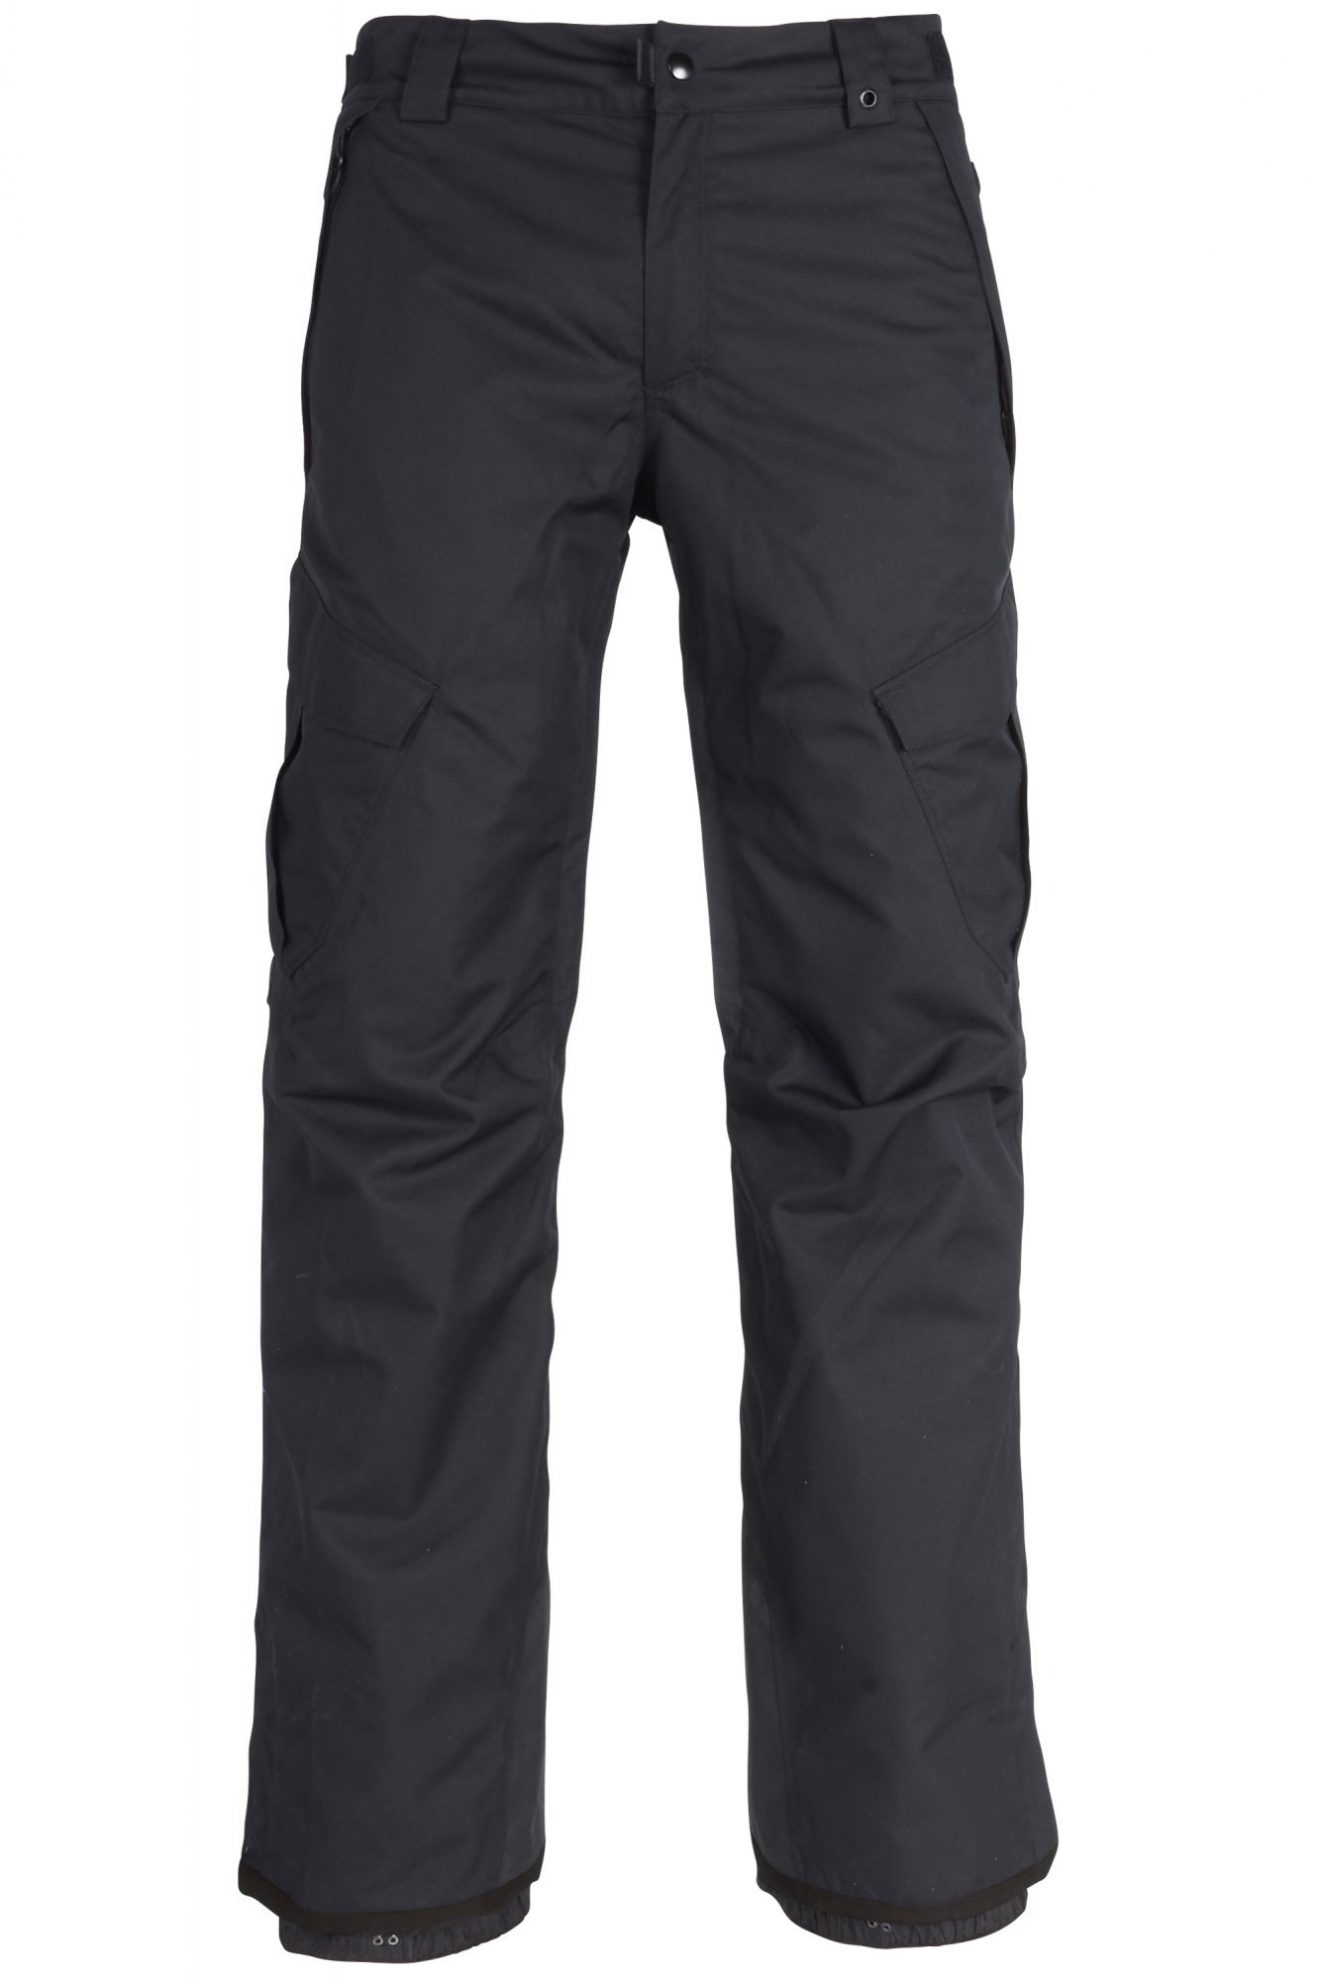 686 Men's Infinity Insulated Cargo Pant - InTheSnow